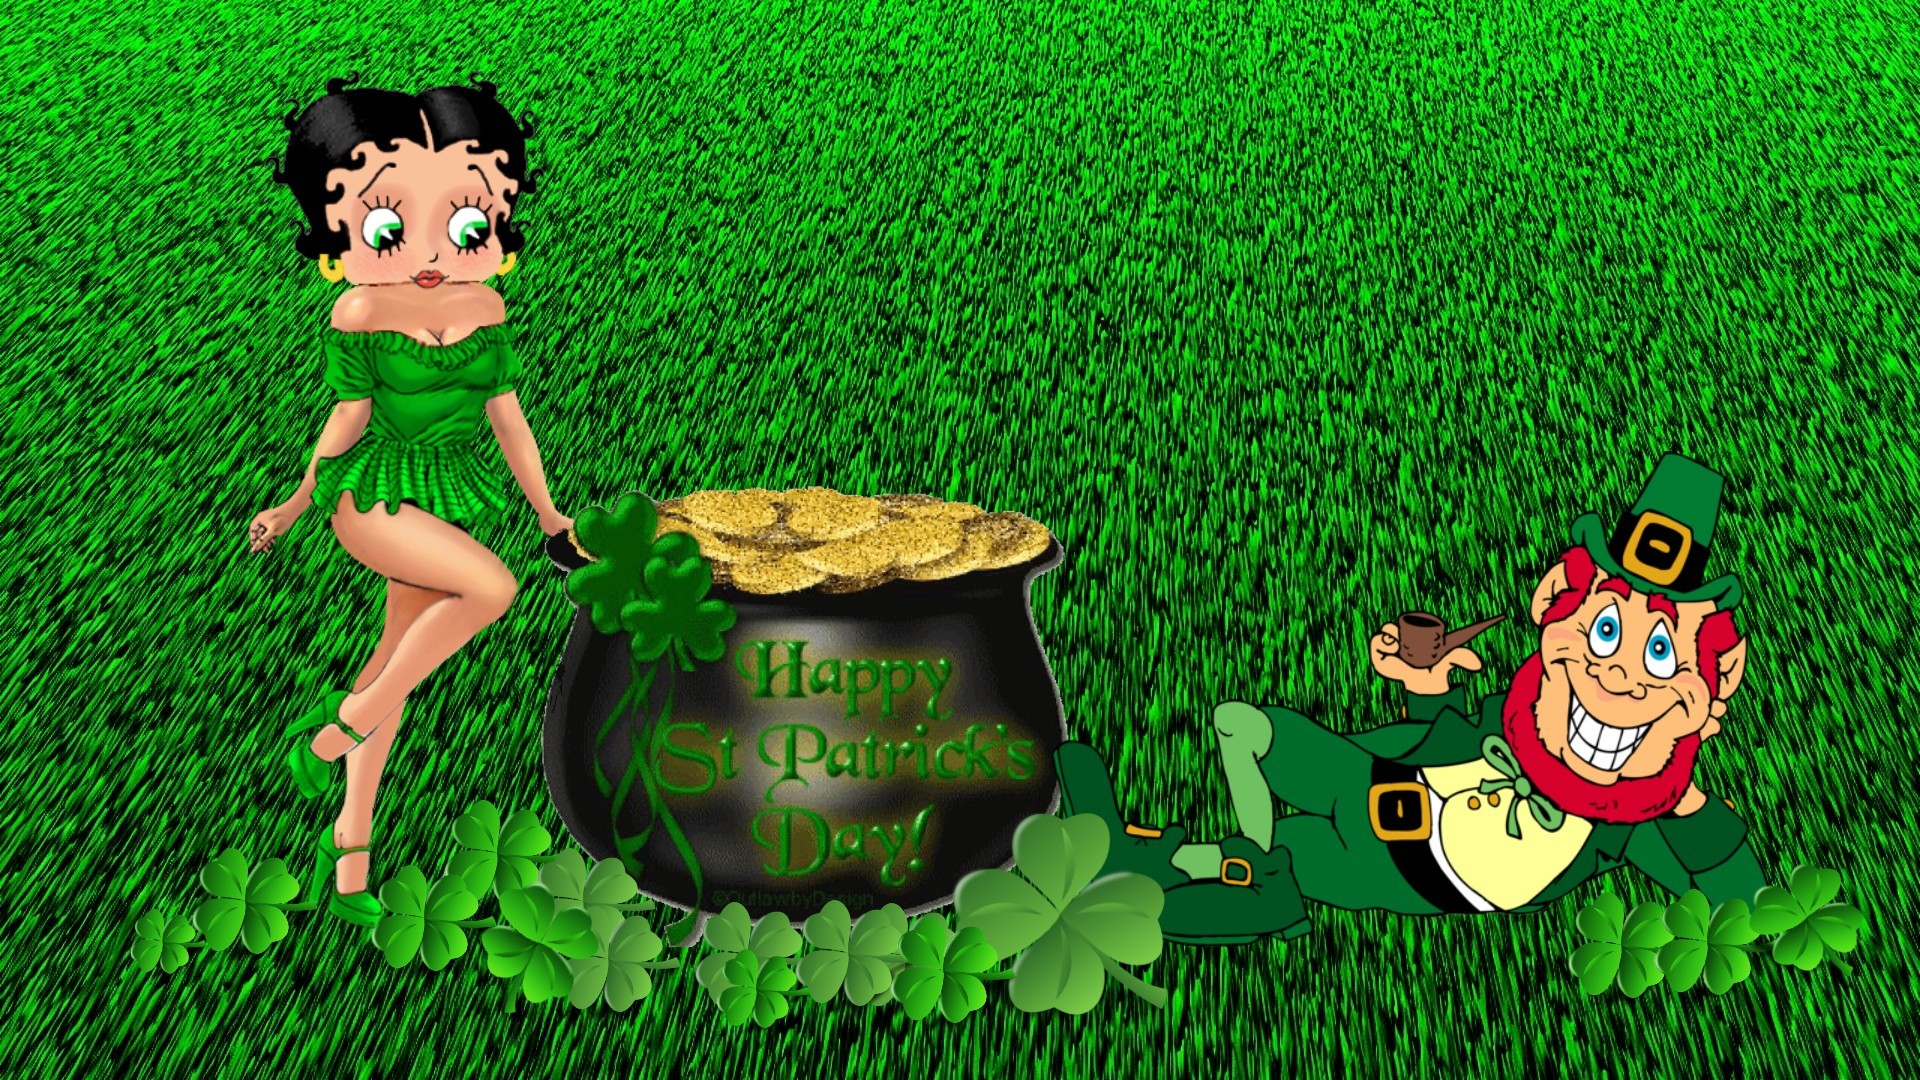 1920x1080 Hot Wallpapers For St. Patrick's Day